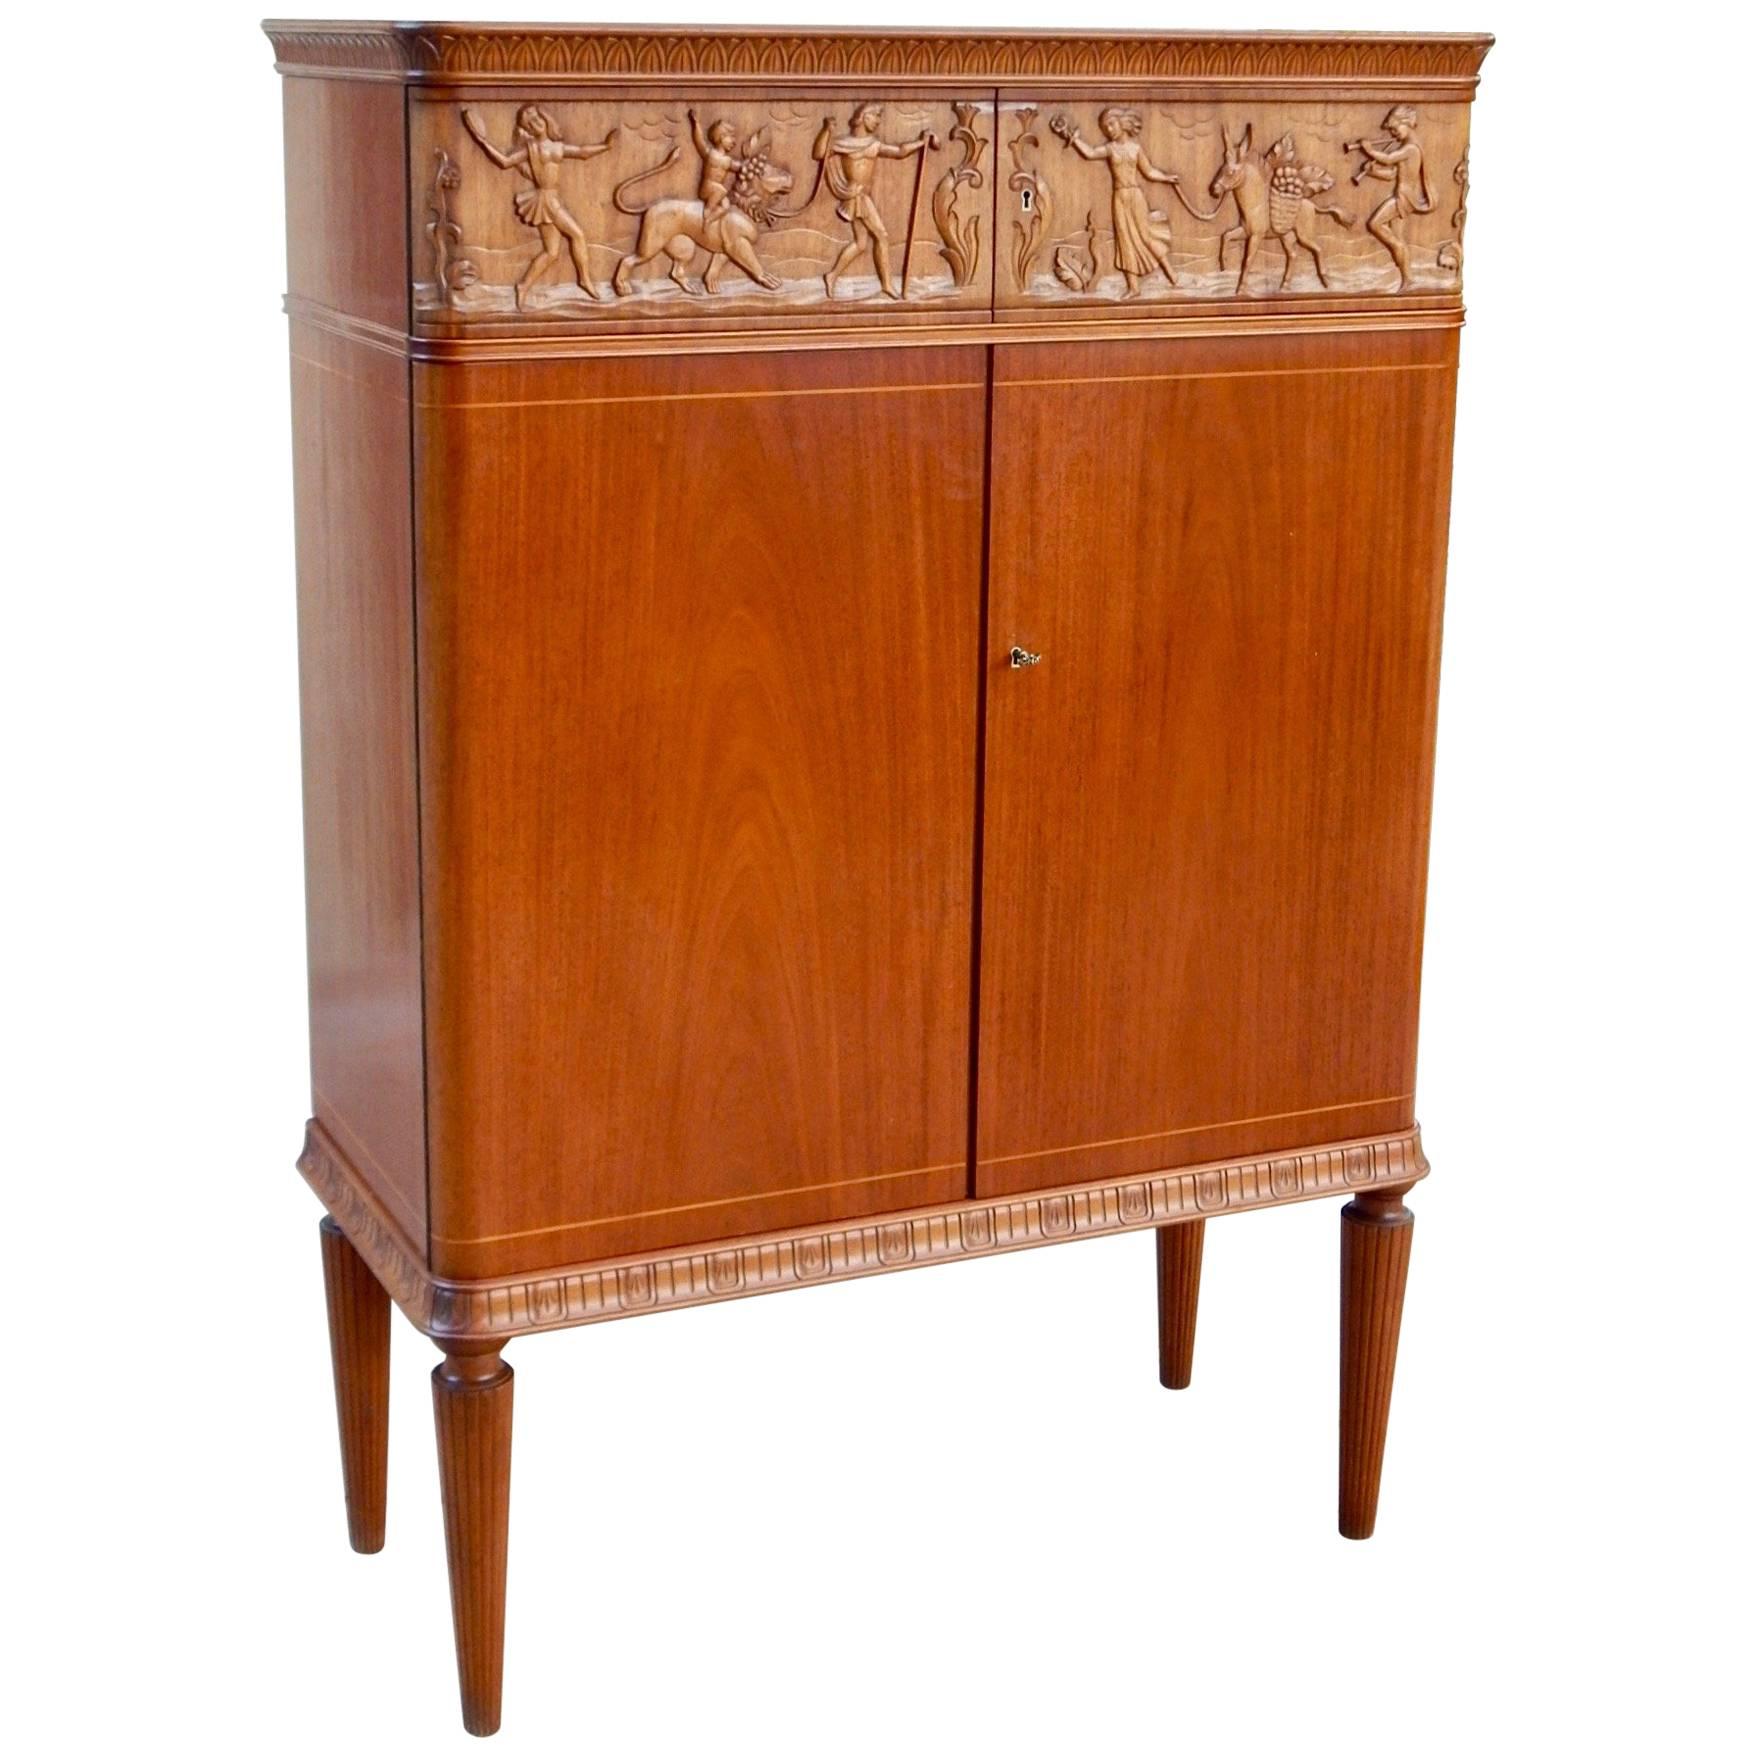 Swedish, 1940s Moderne Storage Cabinet with Figural Relief by Eugene Höglund For Sale